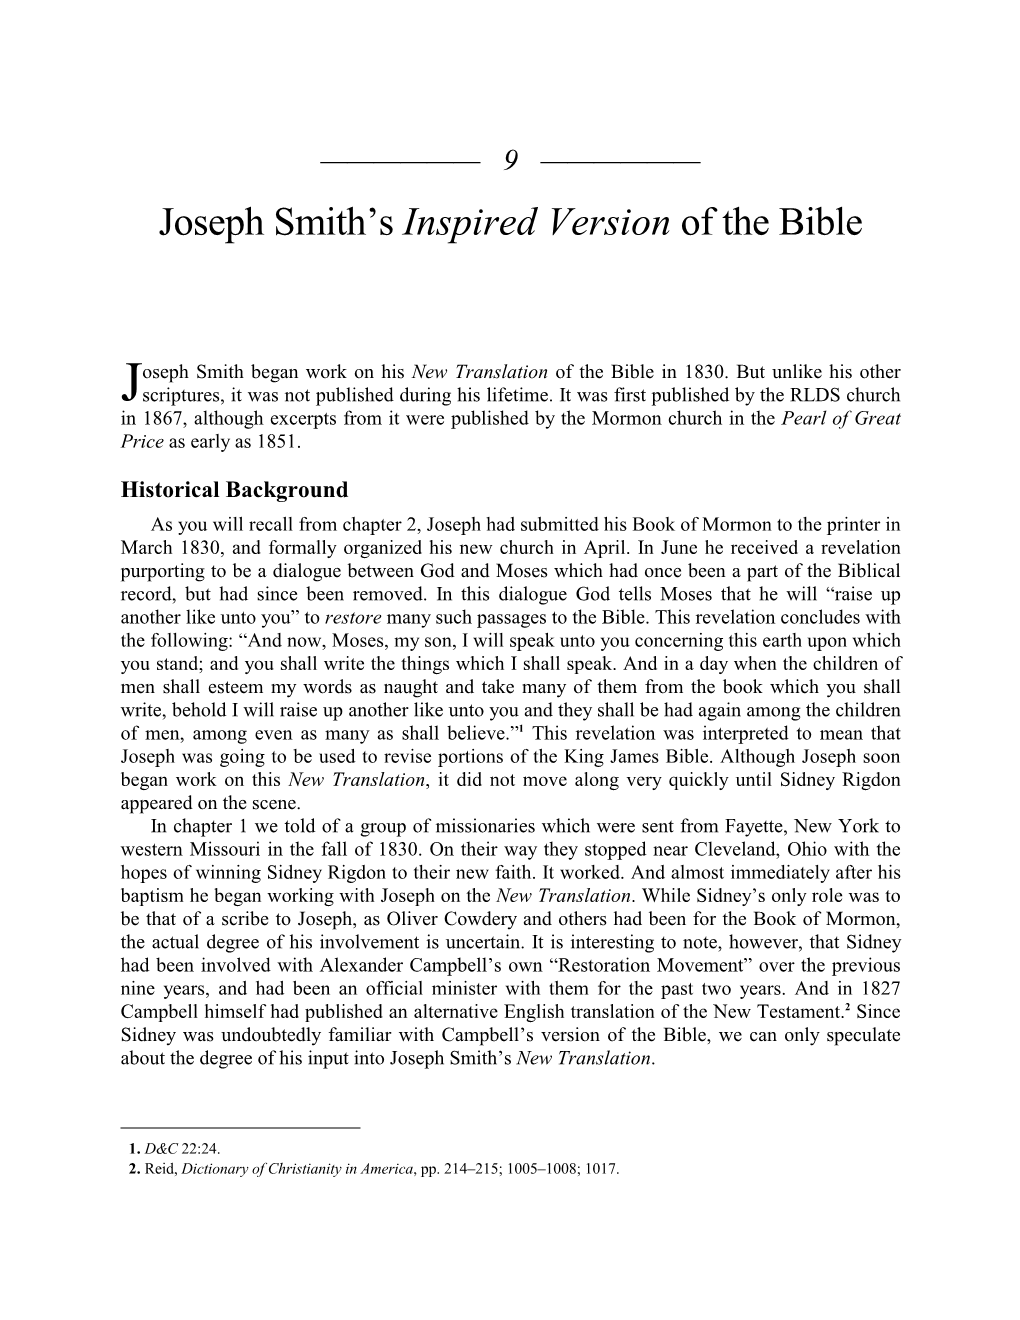 Joseph Smith's Inspired Version of the Bible